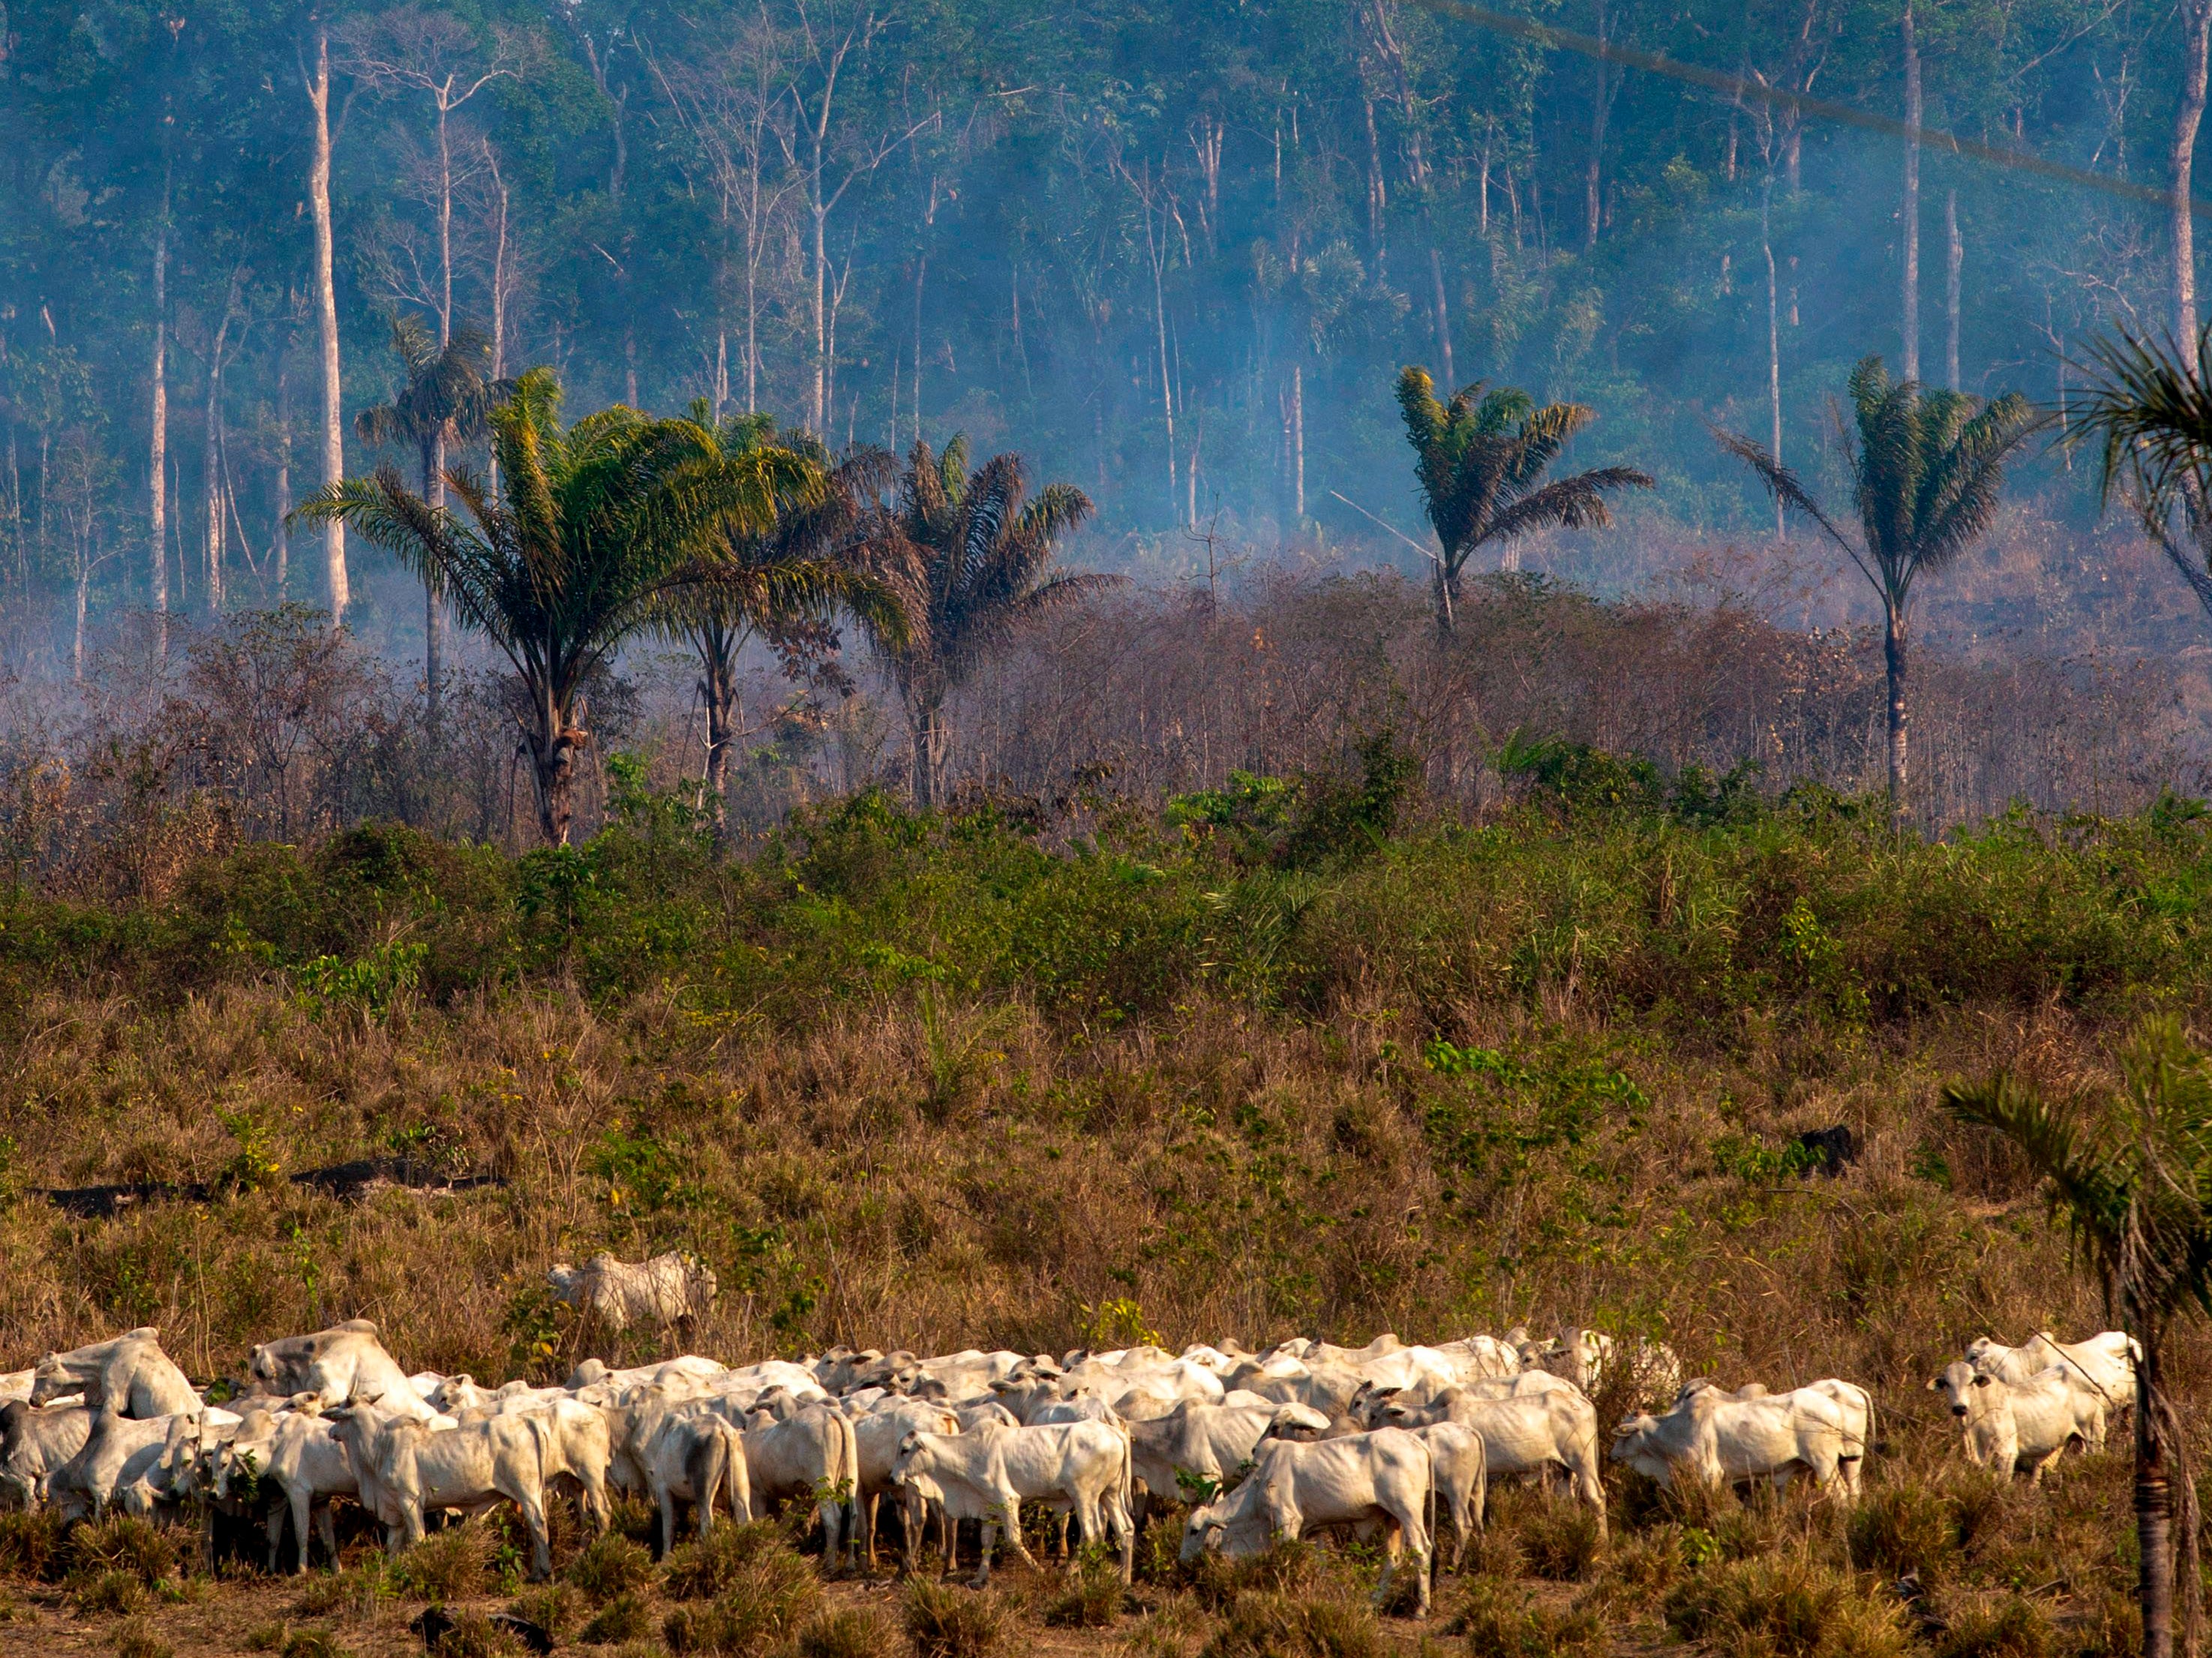 Large swathes of the Amazon rainforest are destroyed to raise and graze cattle